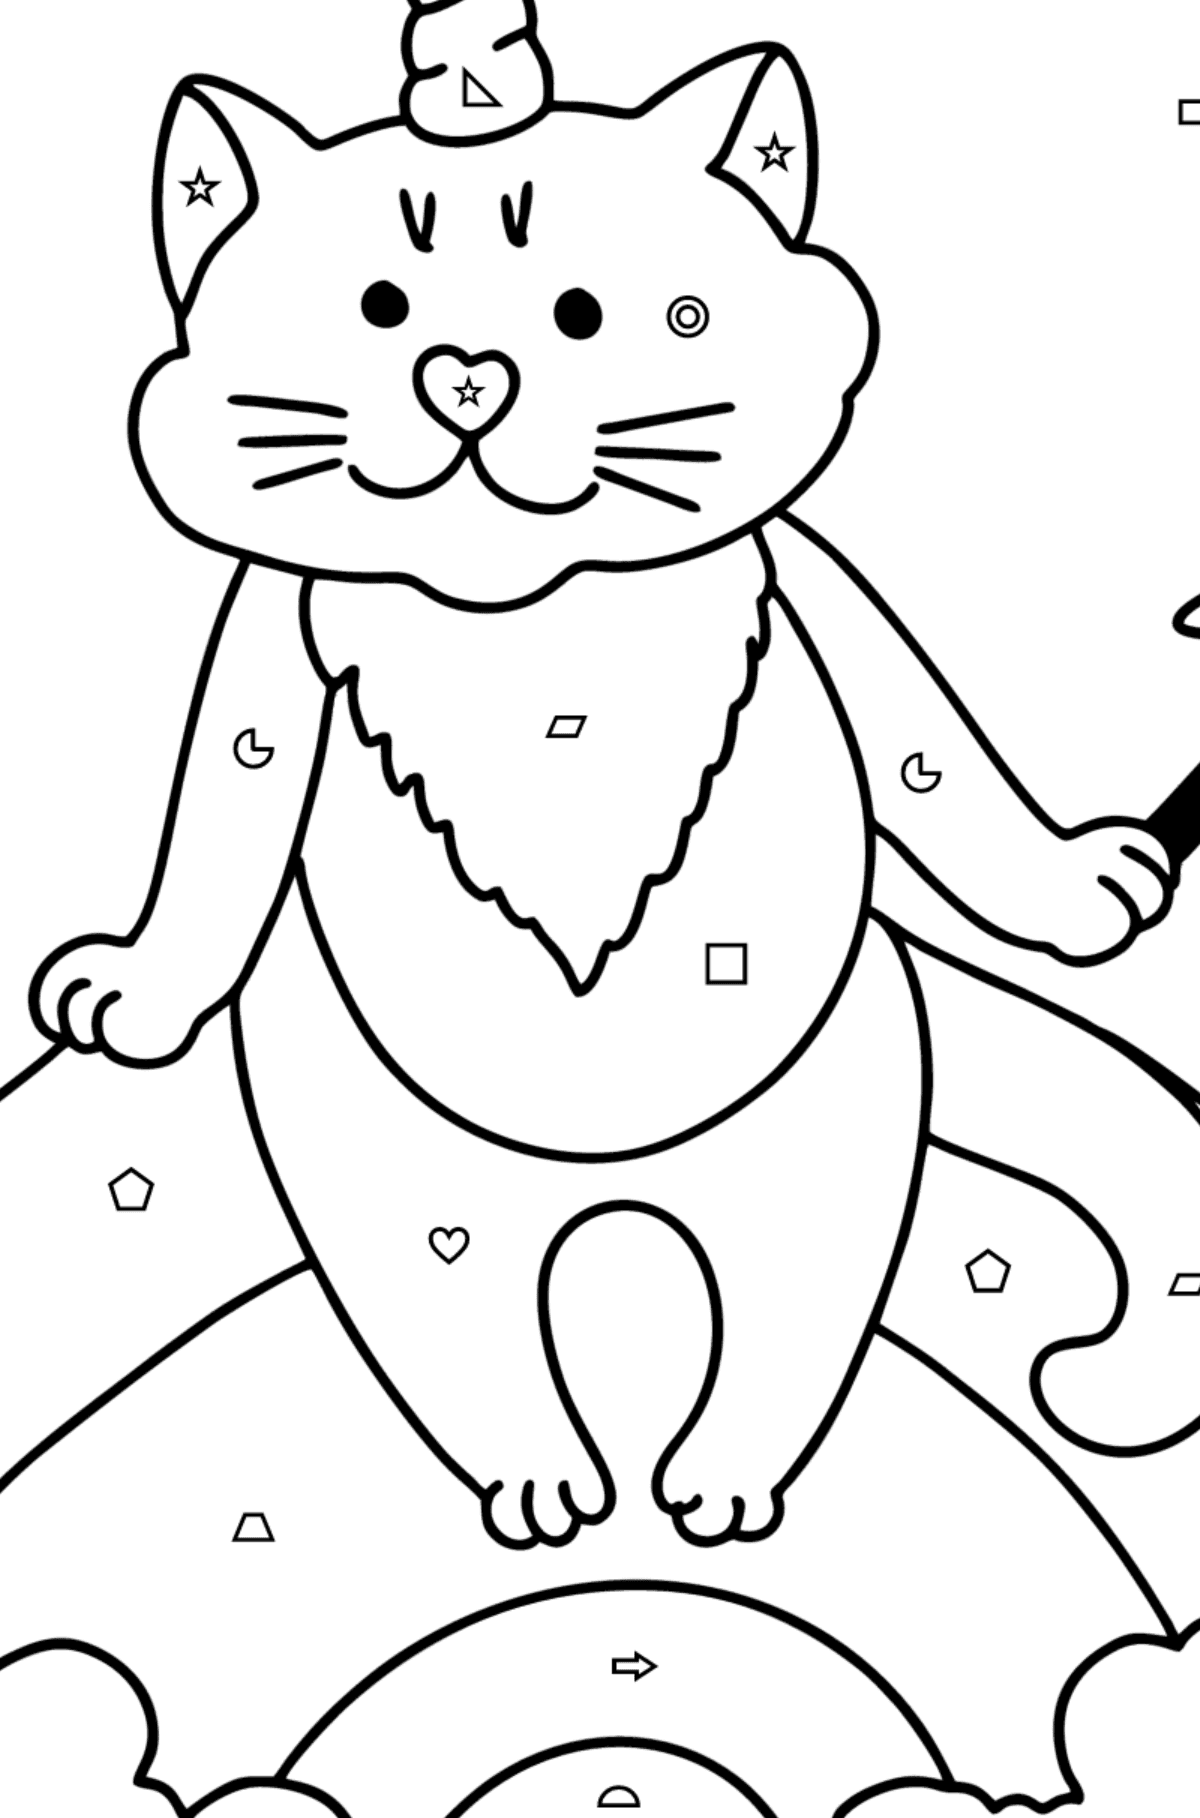 Kitten Unicorn coloring page - Coloring by Geometric Shapes for Kids